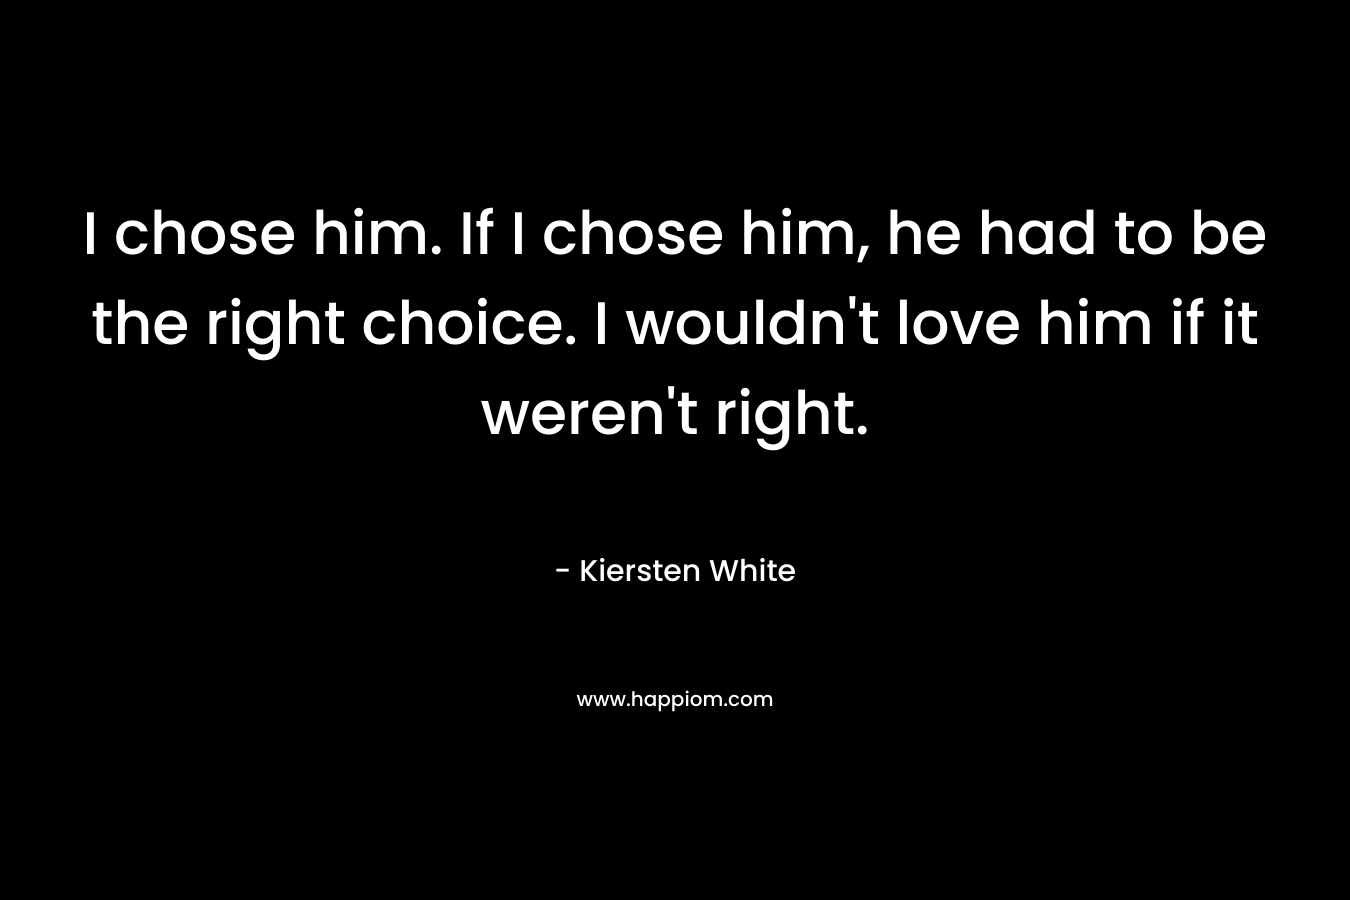 I chose him. If I chose him, he had to be the right choice. I wouldn't love him if it weren't right.